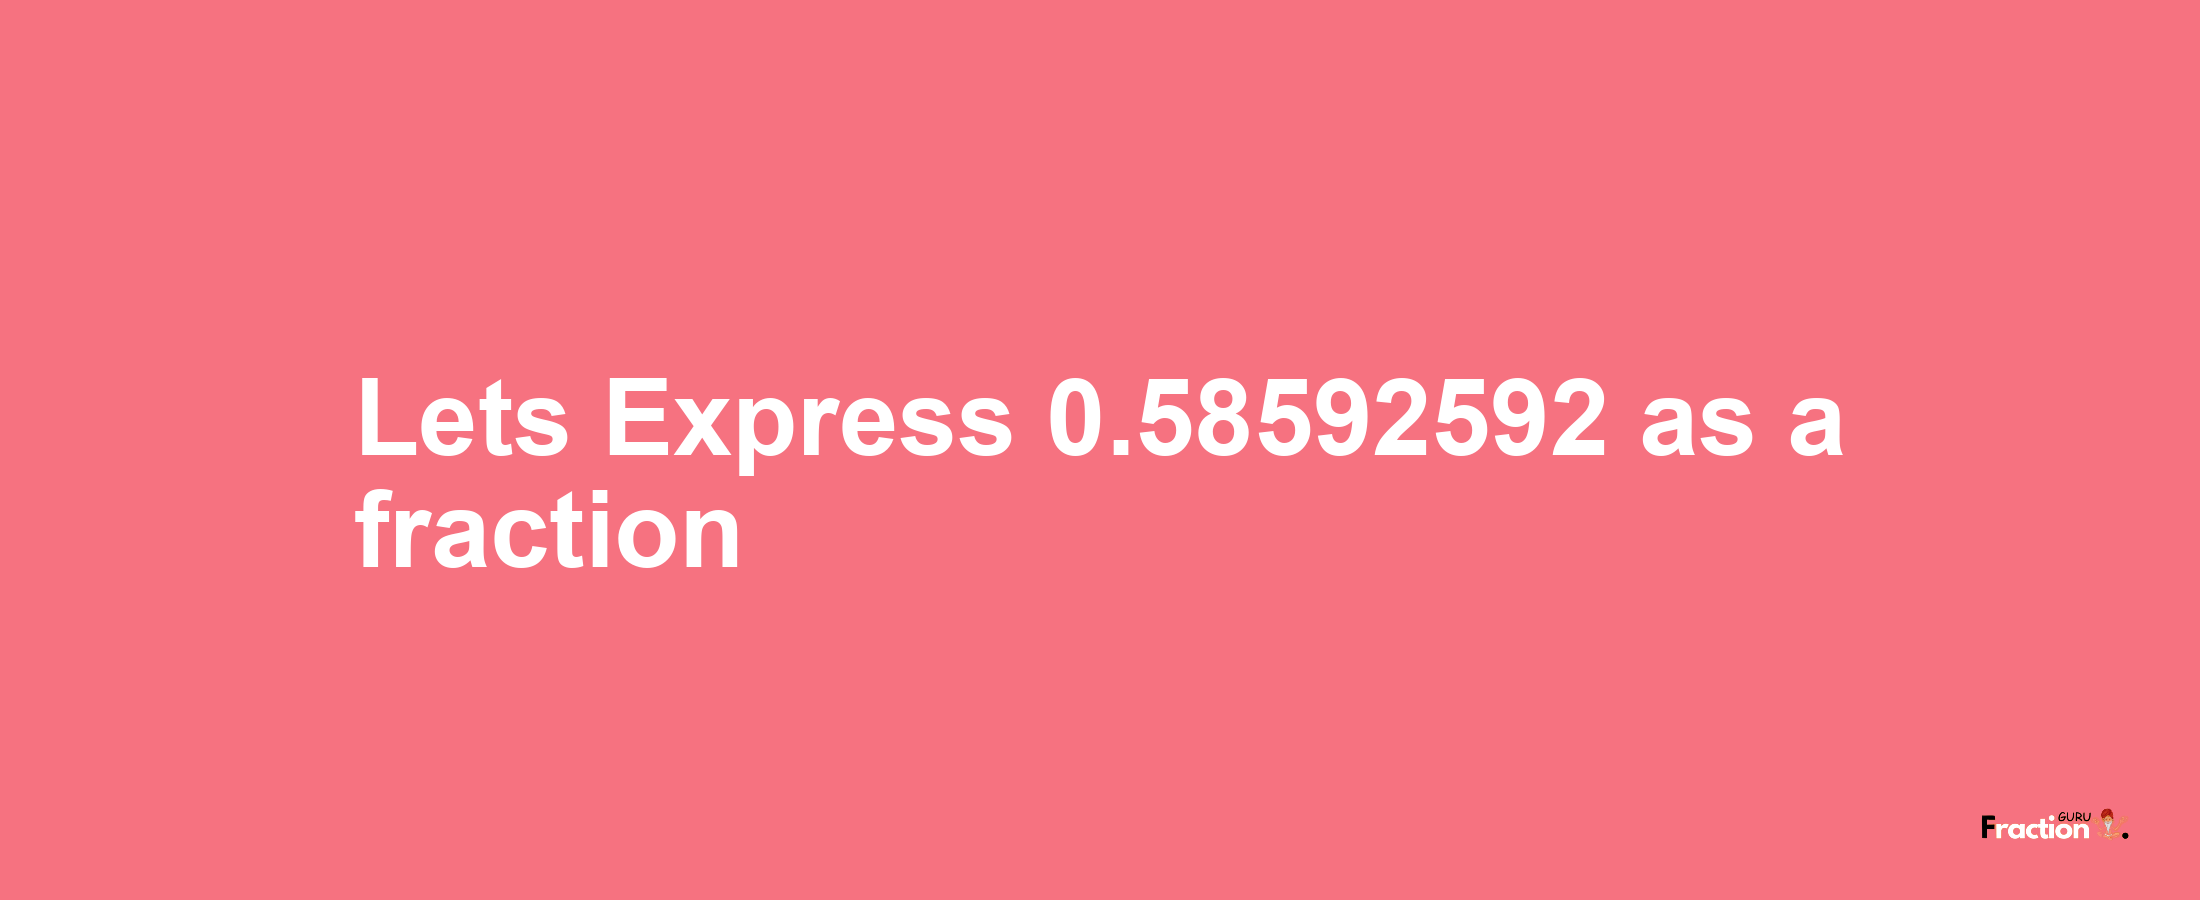 Lets Express 0.58592592 as afraction